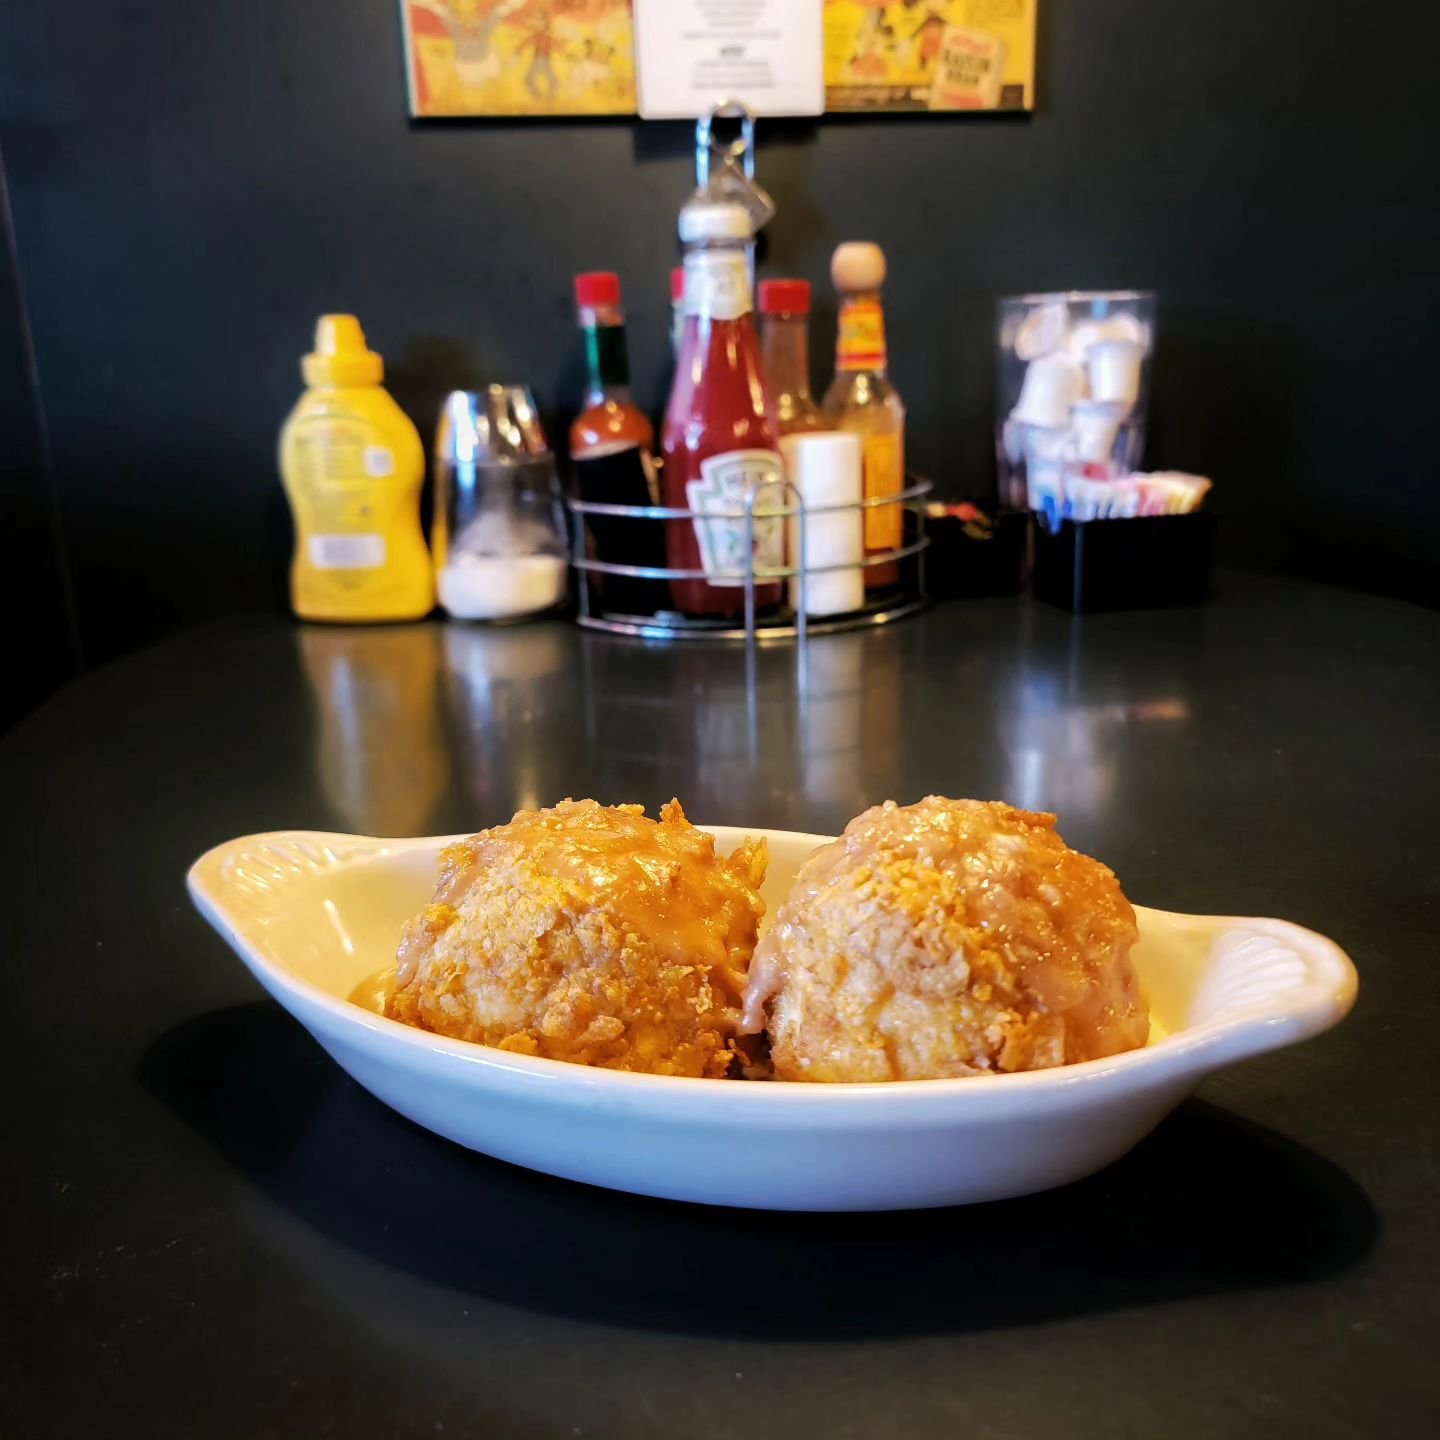 You know and love our deep-fried macaroni &amp; cheese balls but have you tried the FRIED ICE CREAM yet? 😲

Only available this weekend in honor of Cinco de Mayo!

Two giant scoops of vanilla ice cream coated in crispy cornflakes then deep fried and